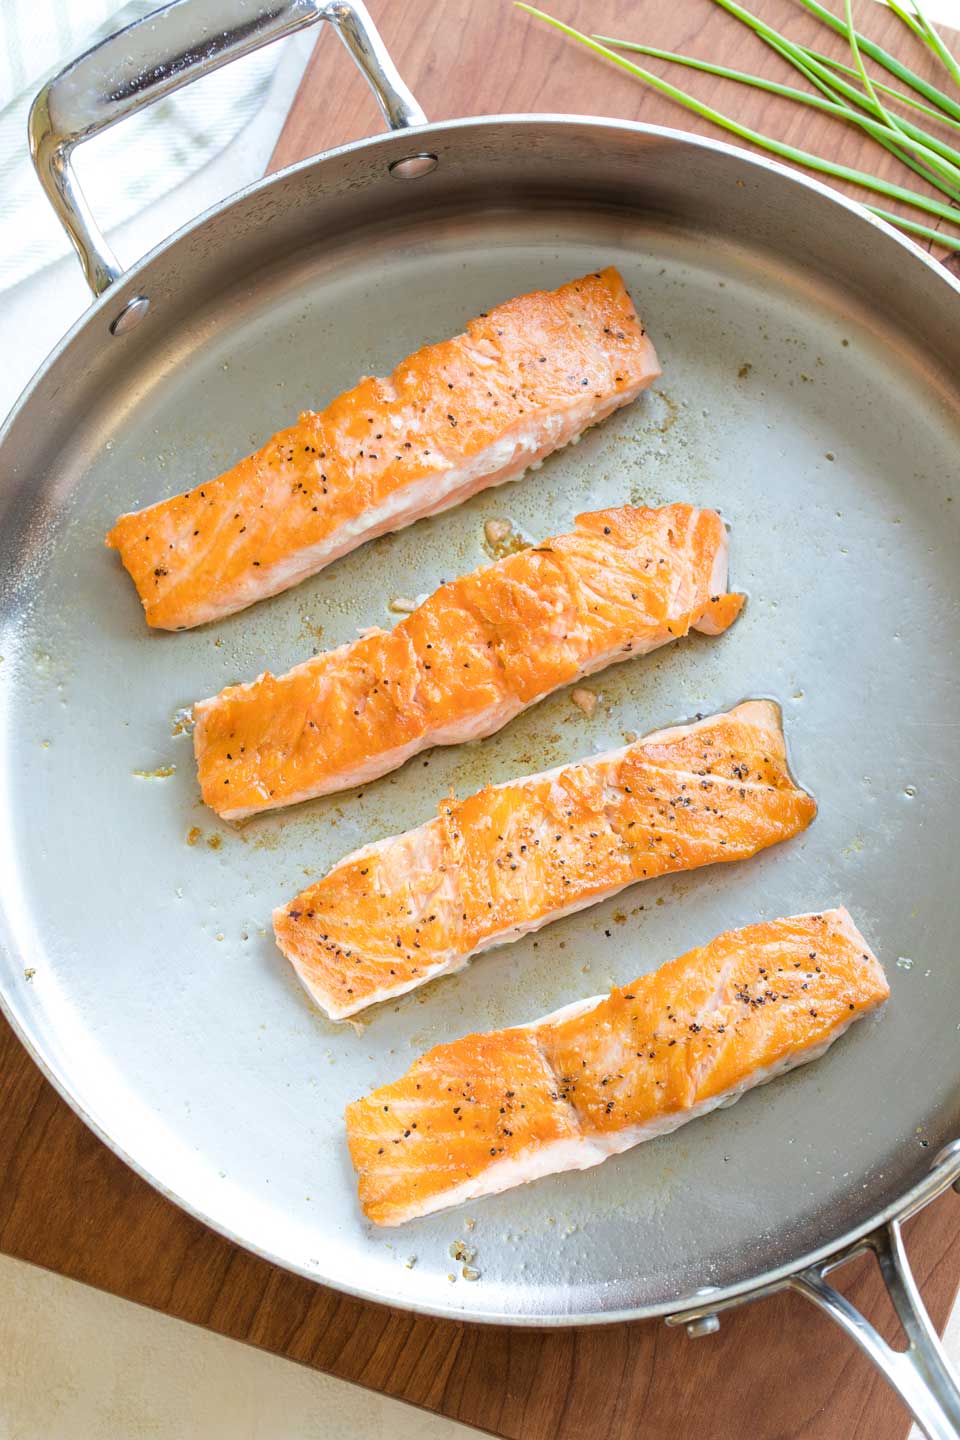 Overhead of four salmon fillets in a metal pan after they have been seared on one side and then flipped, so you can see the seared top crust.